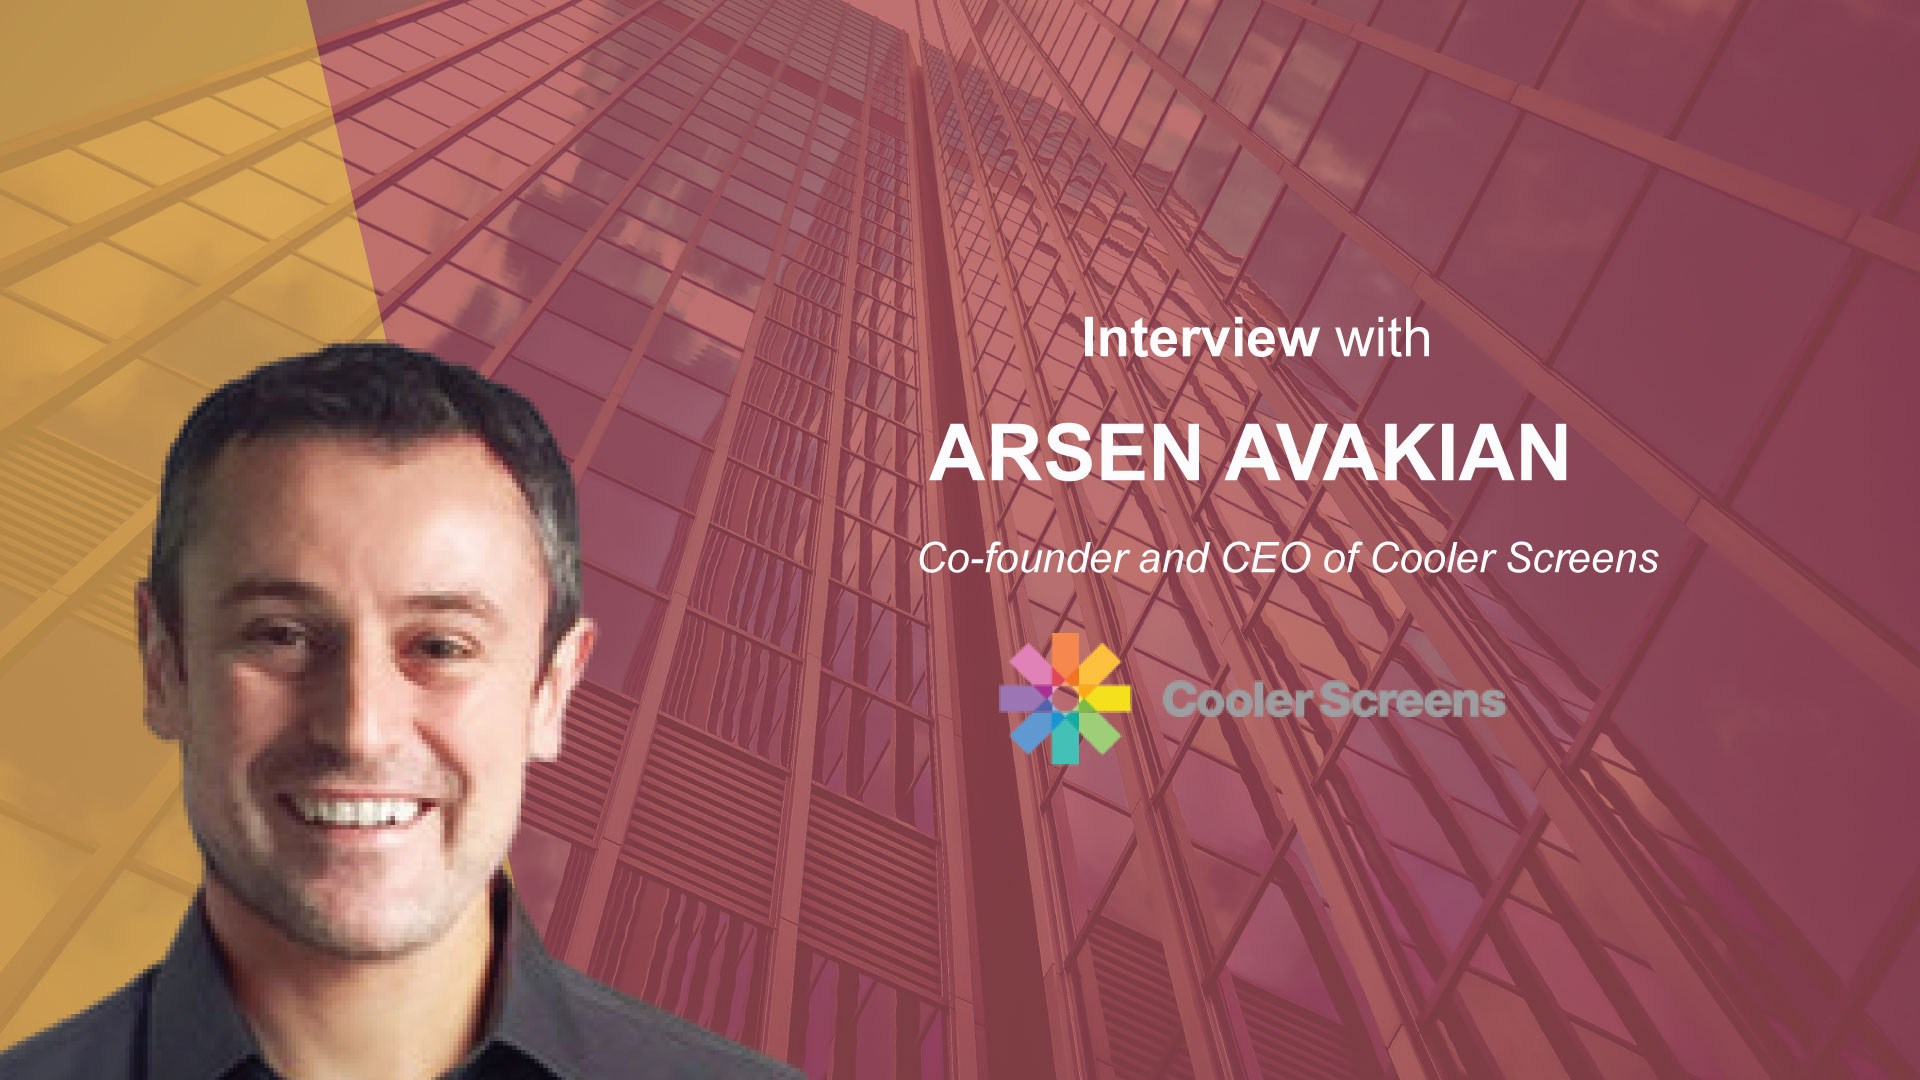 MarTech Interview with Arsen Avakian, Co-founder and CEO of Cooler Screens | MarTech Cube